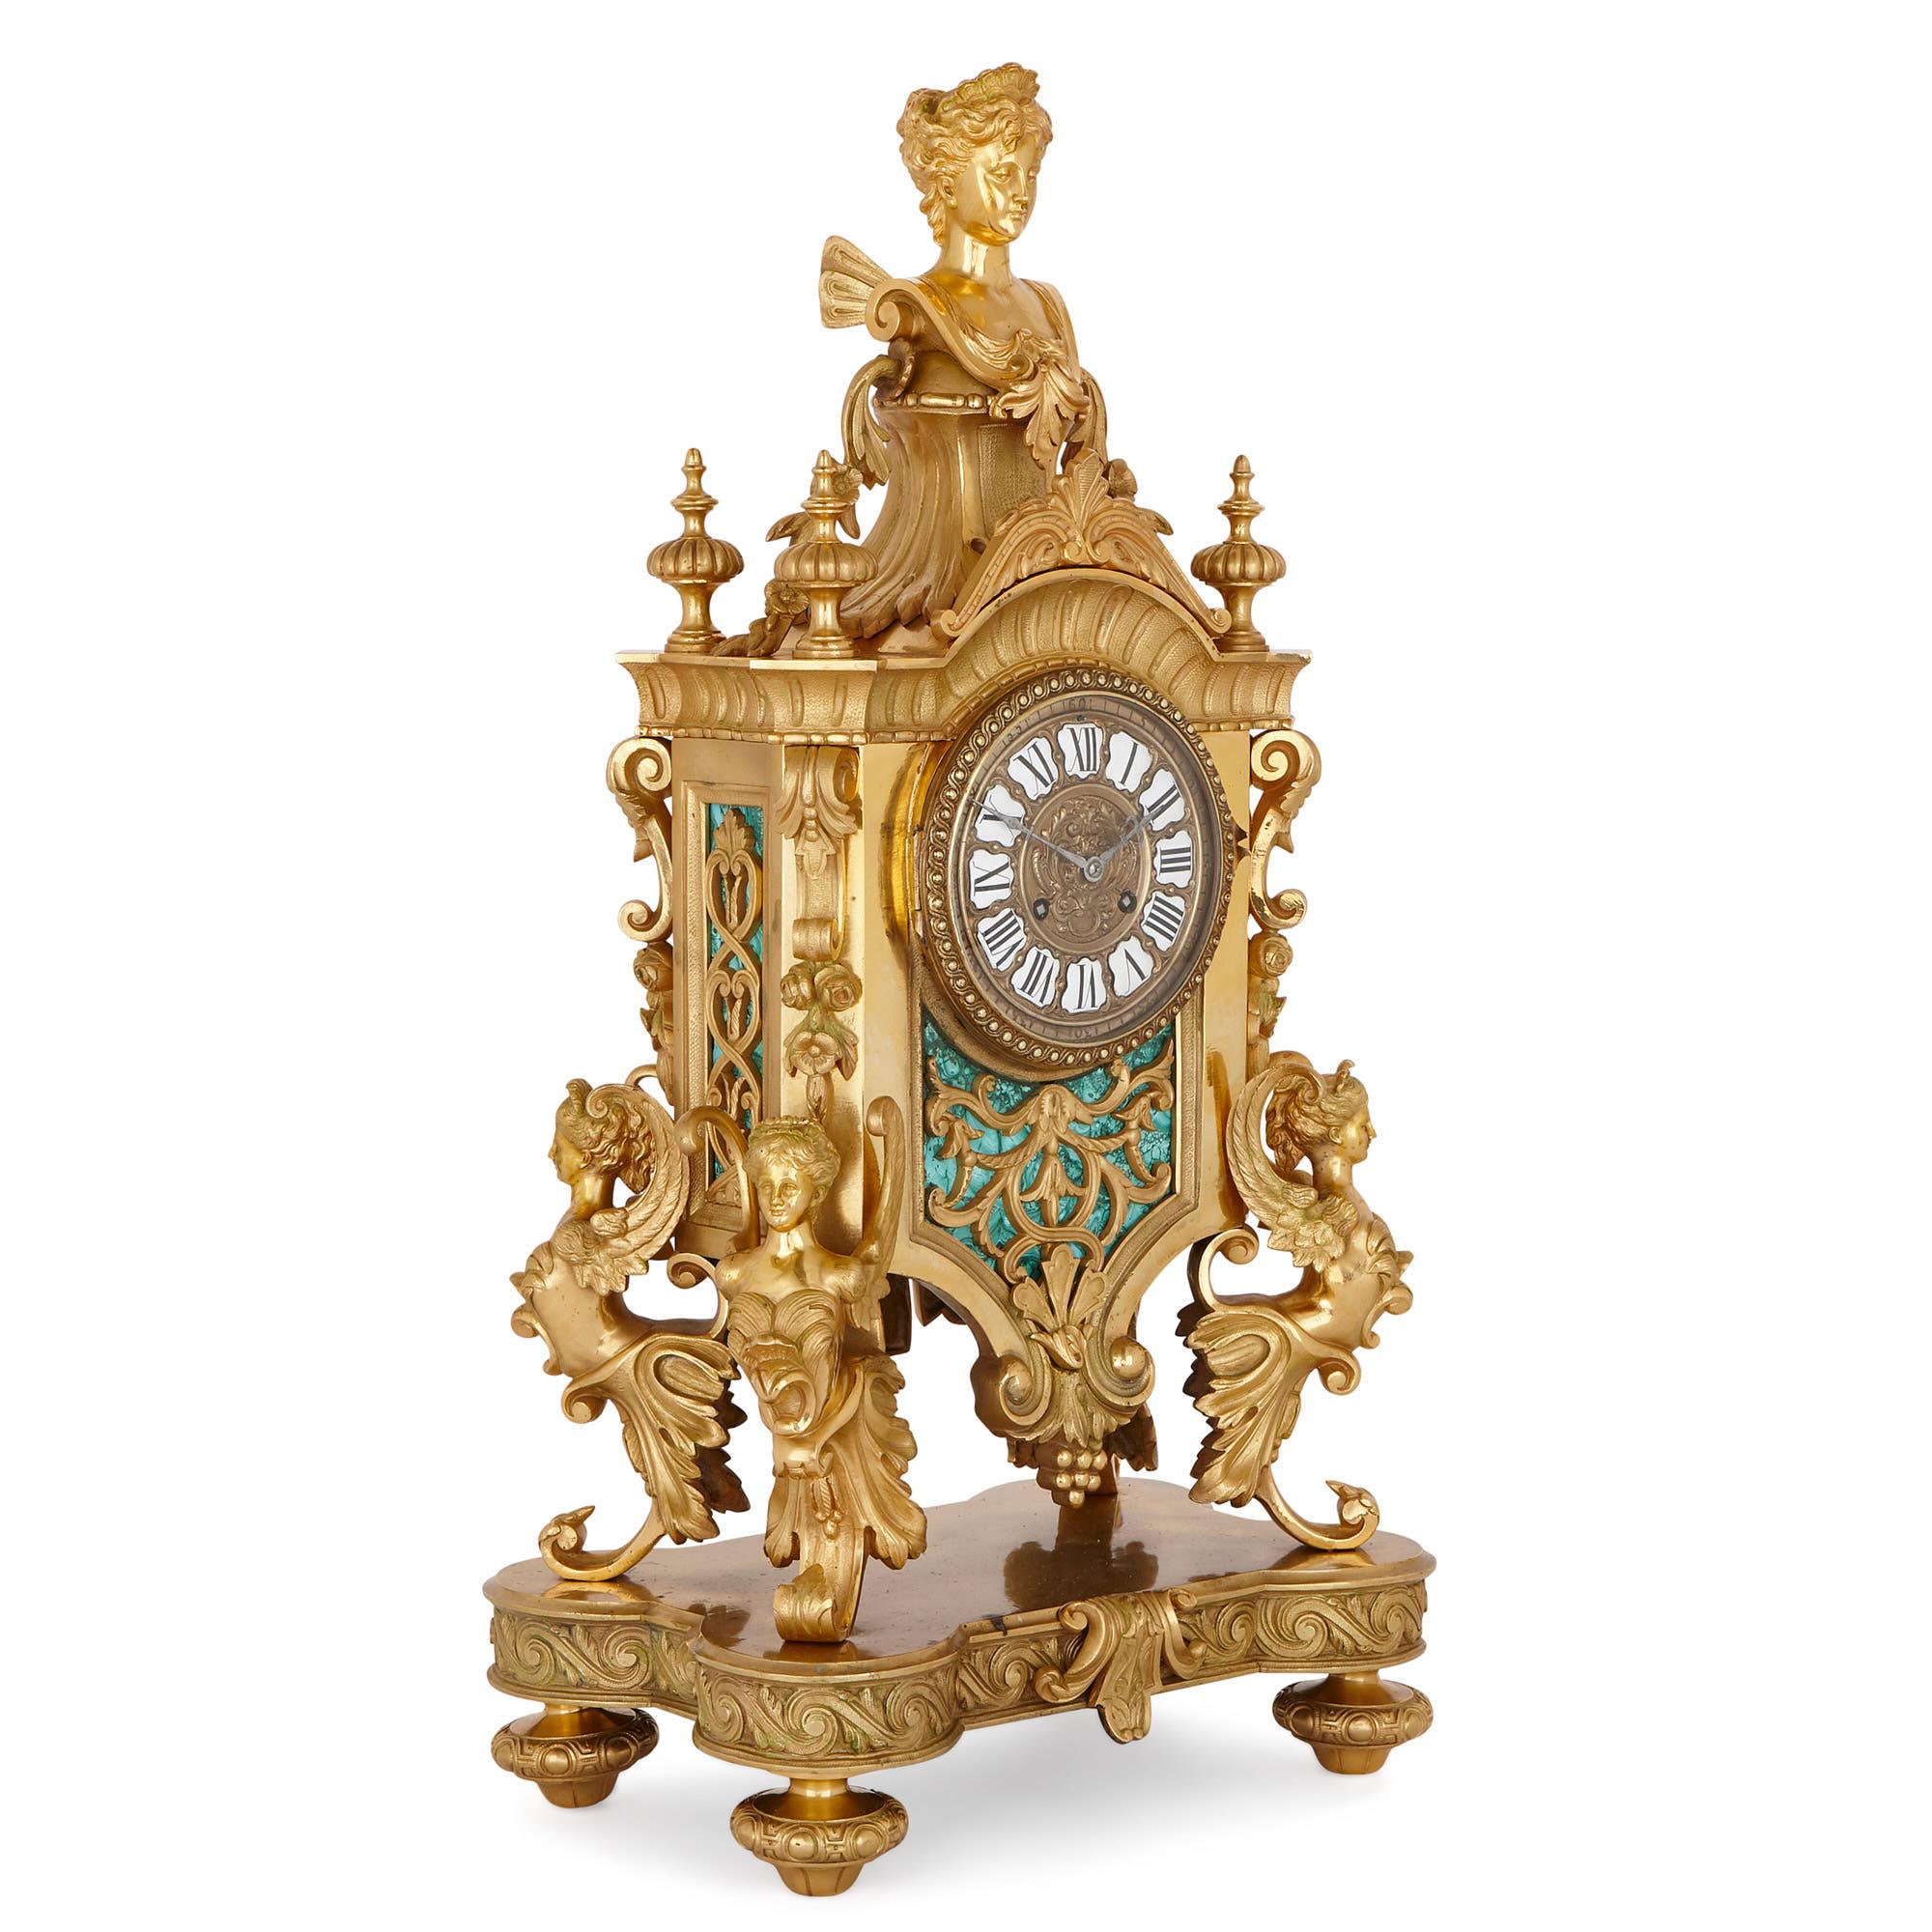 This wonderfully ornate gilt bronze mantel clock is covered with fine sculptural decoration, including female busts, architectural motifs and stylized foliage. With its wealth of classical ornamentation, this clock is clearly inspired by French